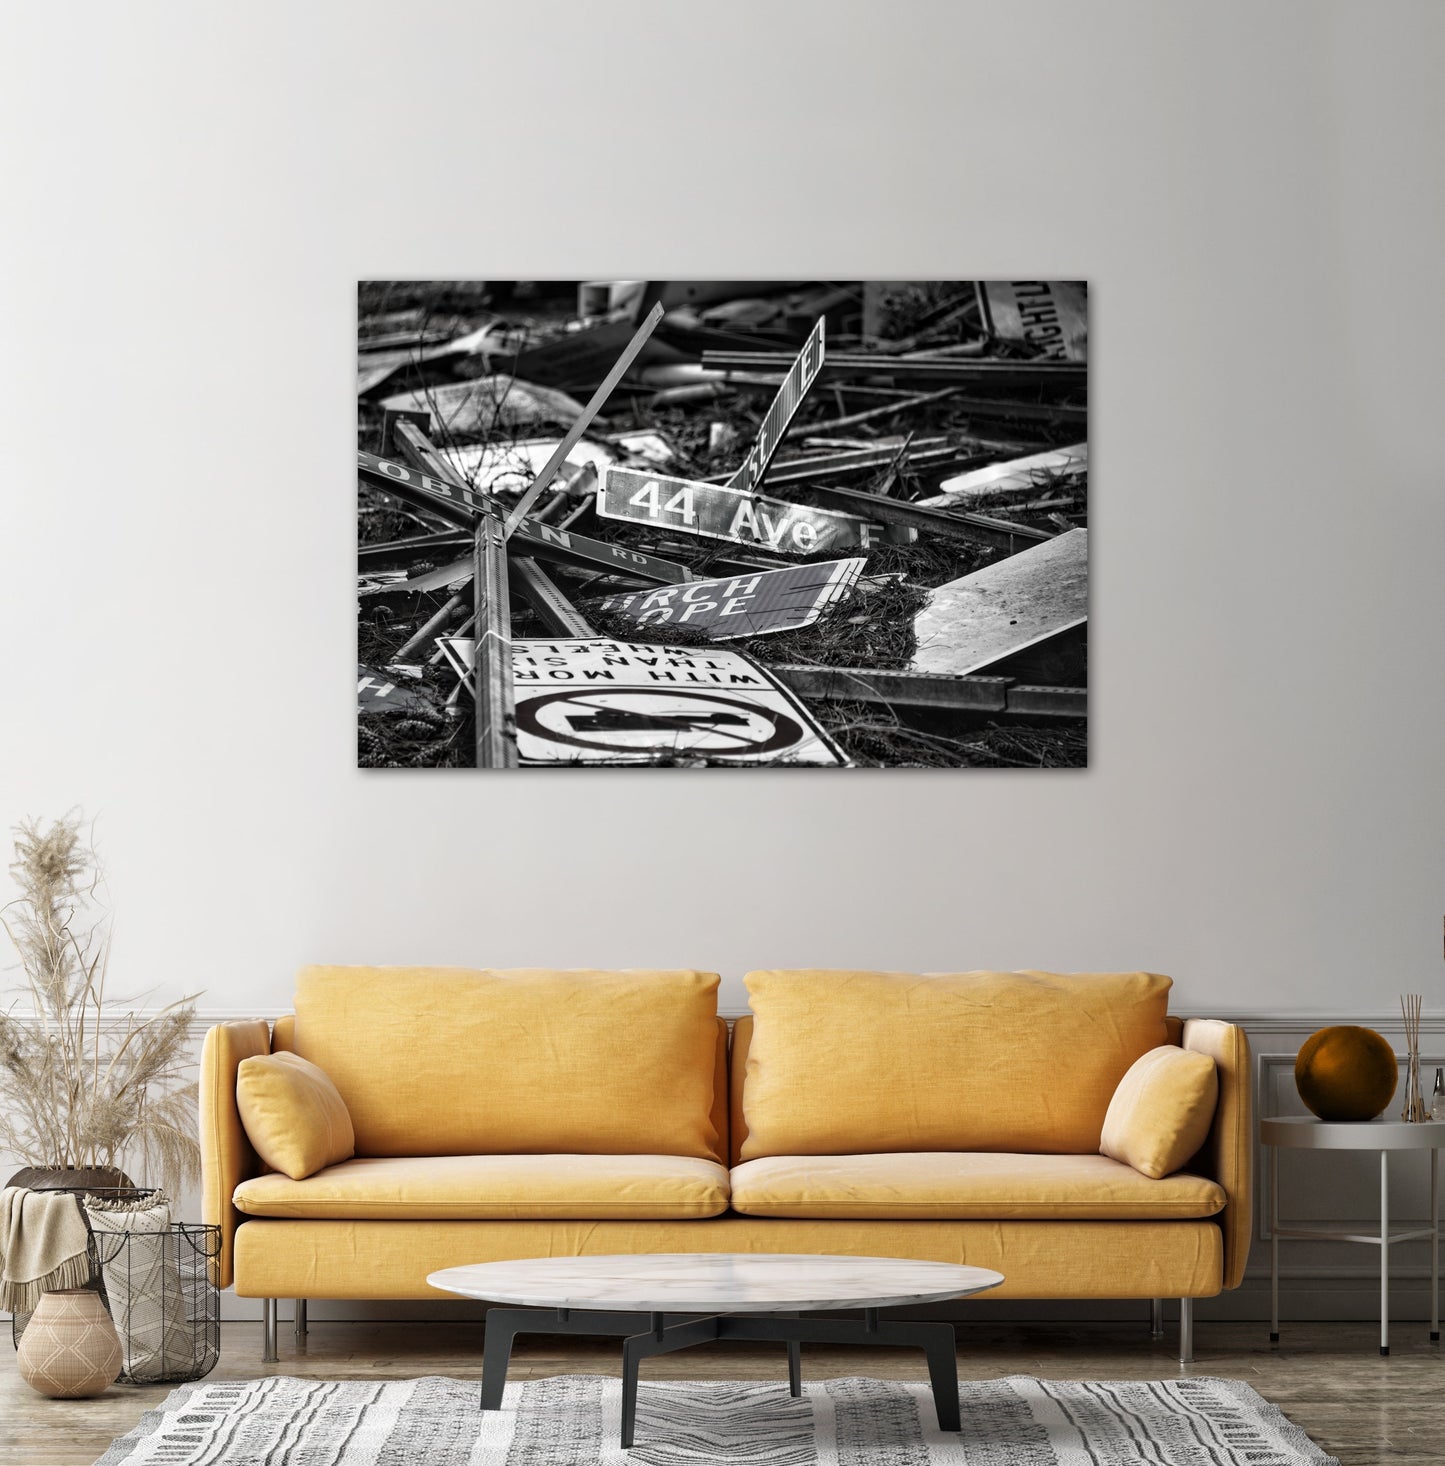 Travel road signs on street photography canvas print on living room wall